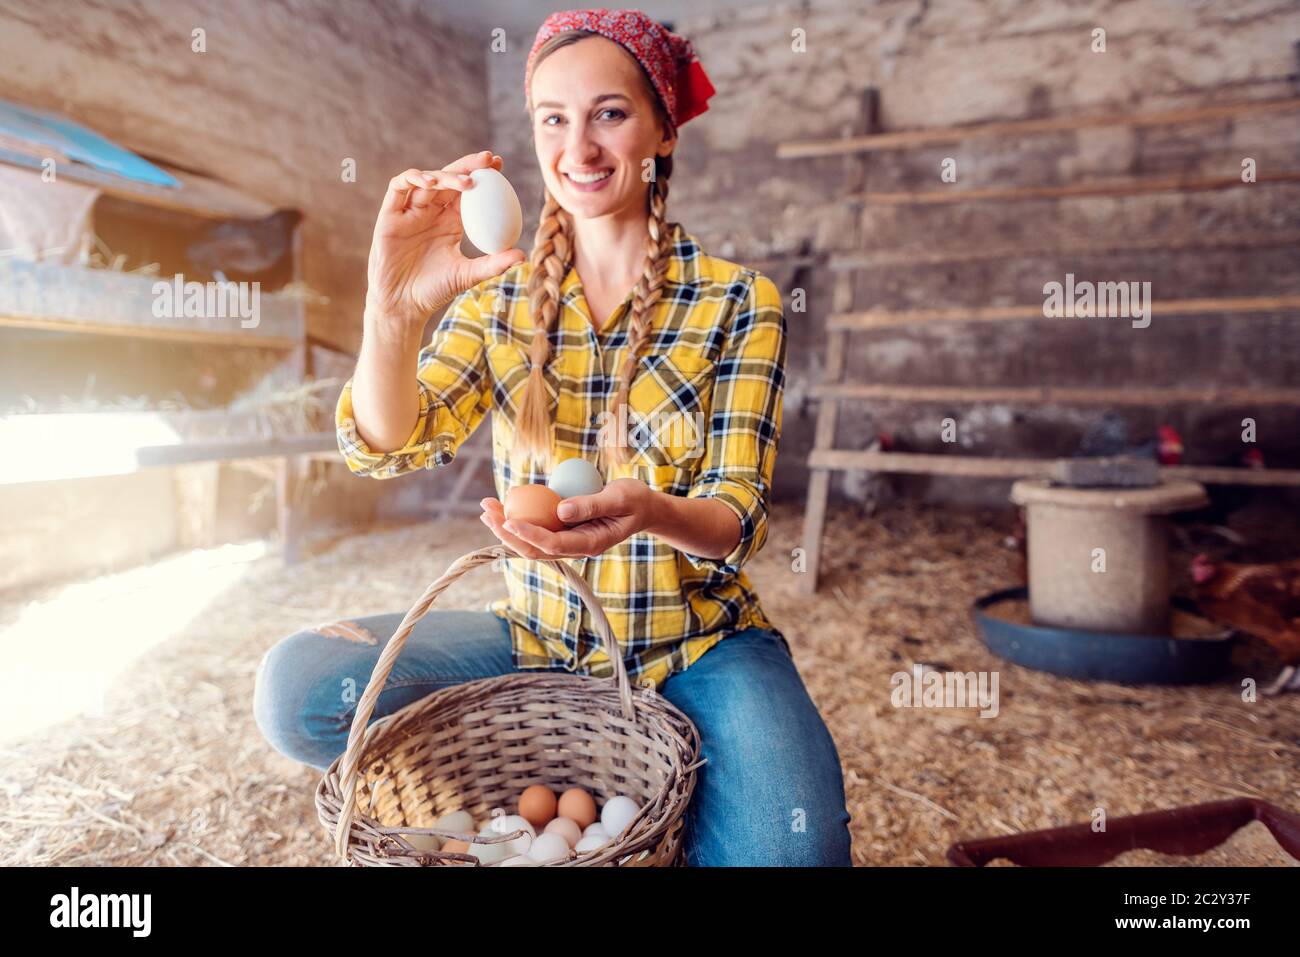 Famer woman collecting organic eggs from her hens in basket Stock Photo